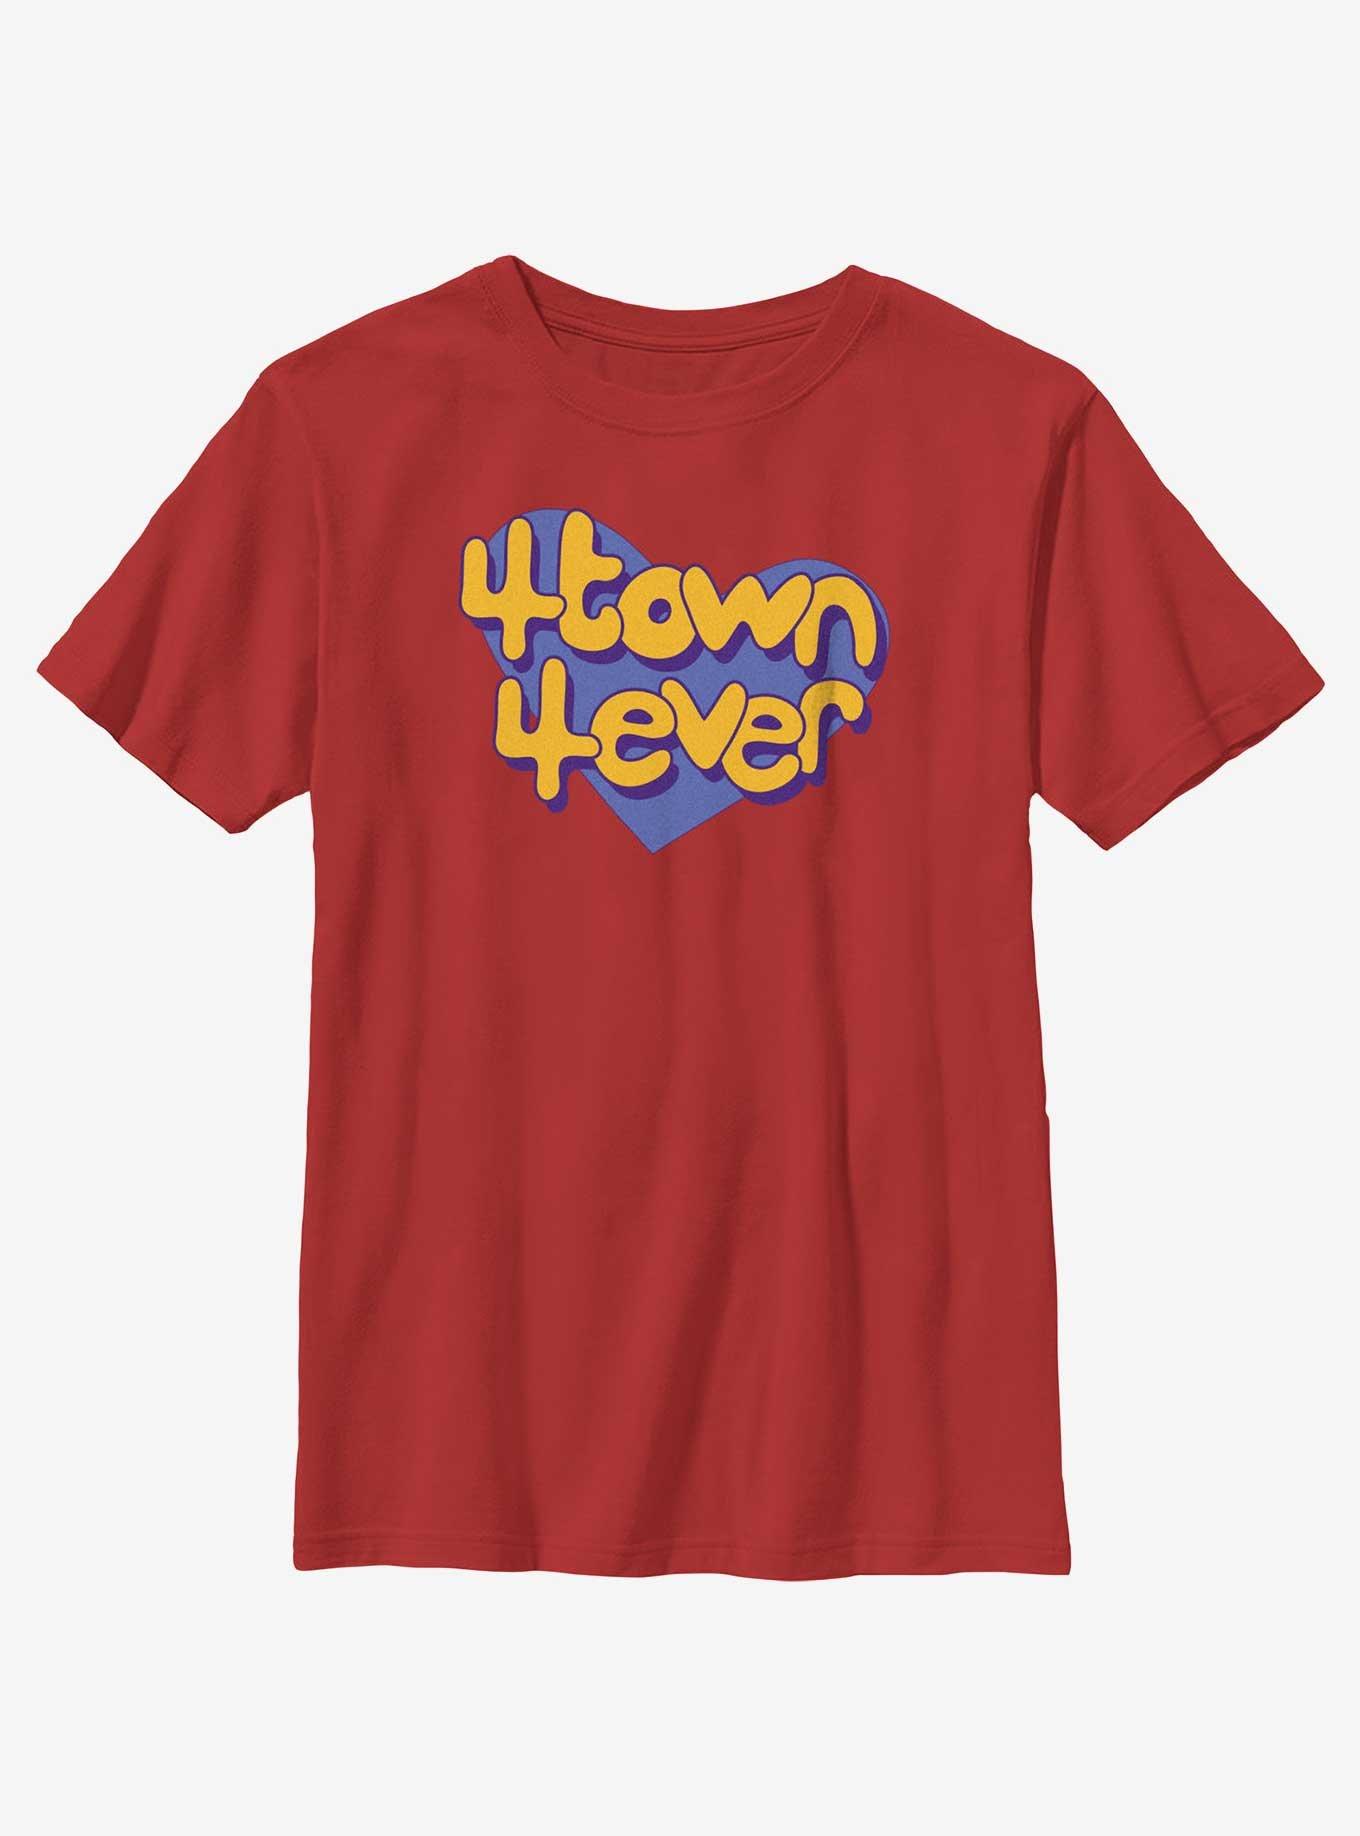 Disney Pixar Turning Red 4 Town 4 Ever Heart Youth T-Shirt, RED, hi-res